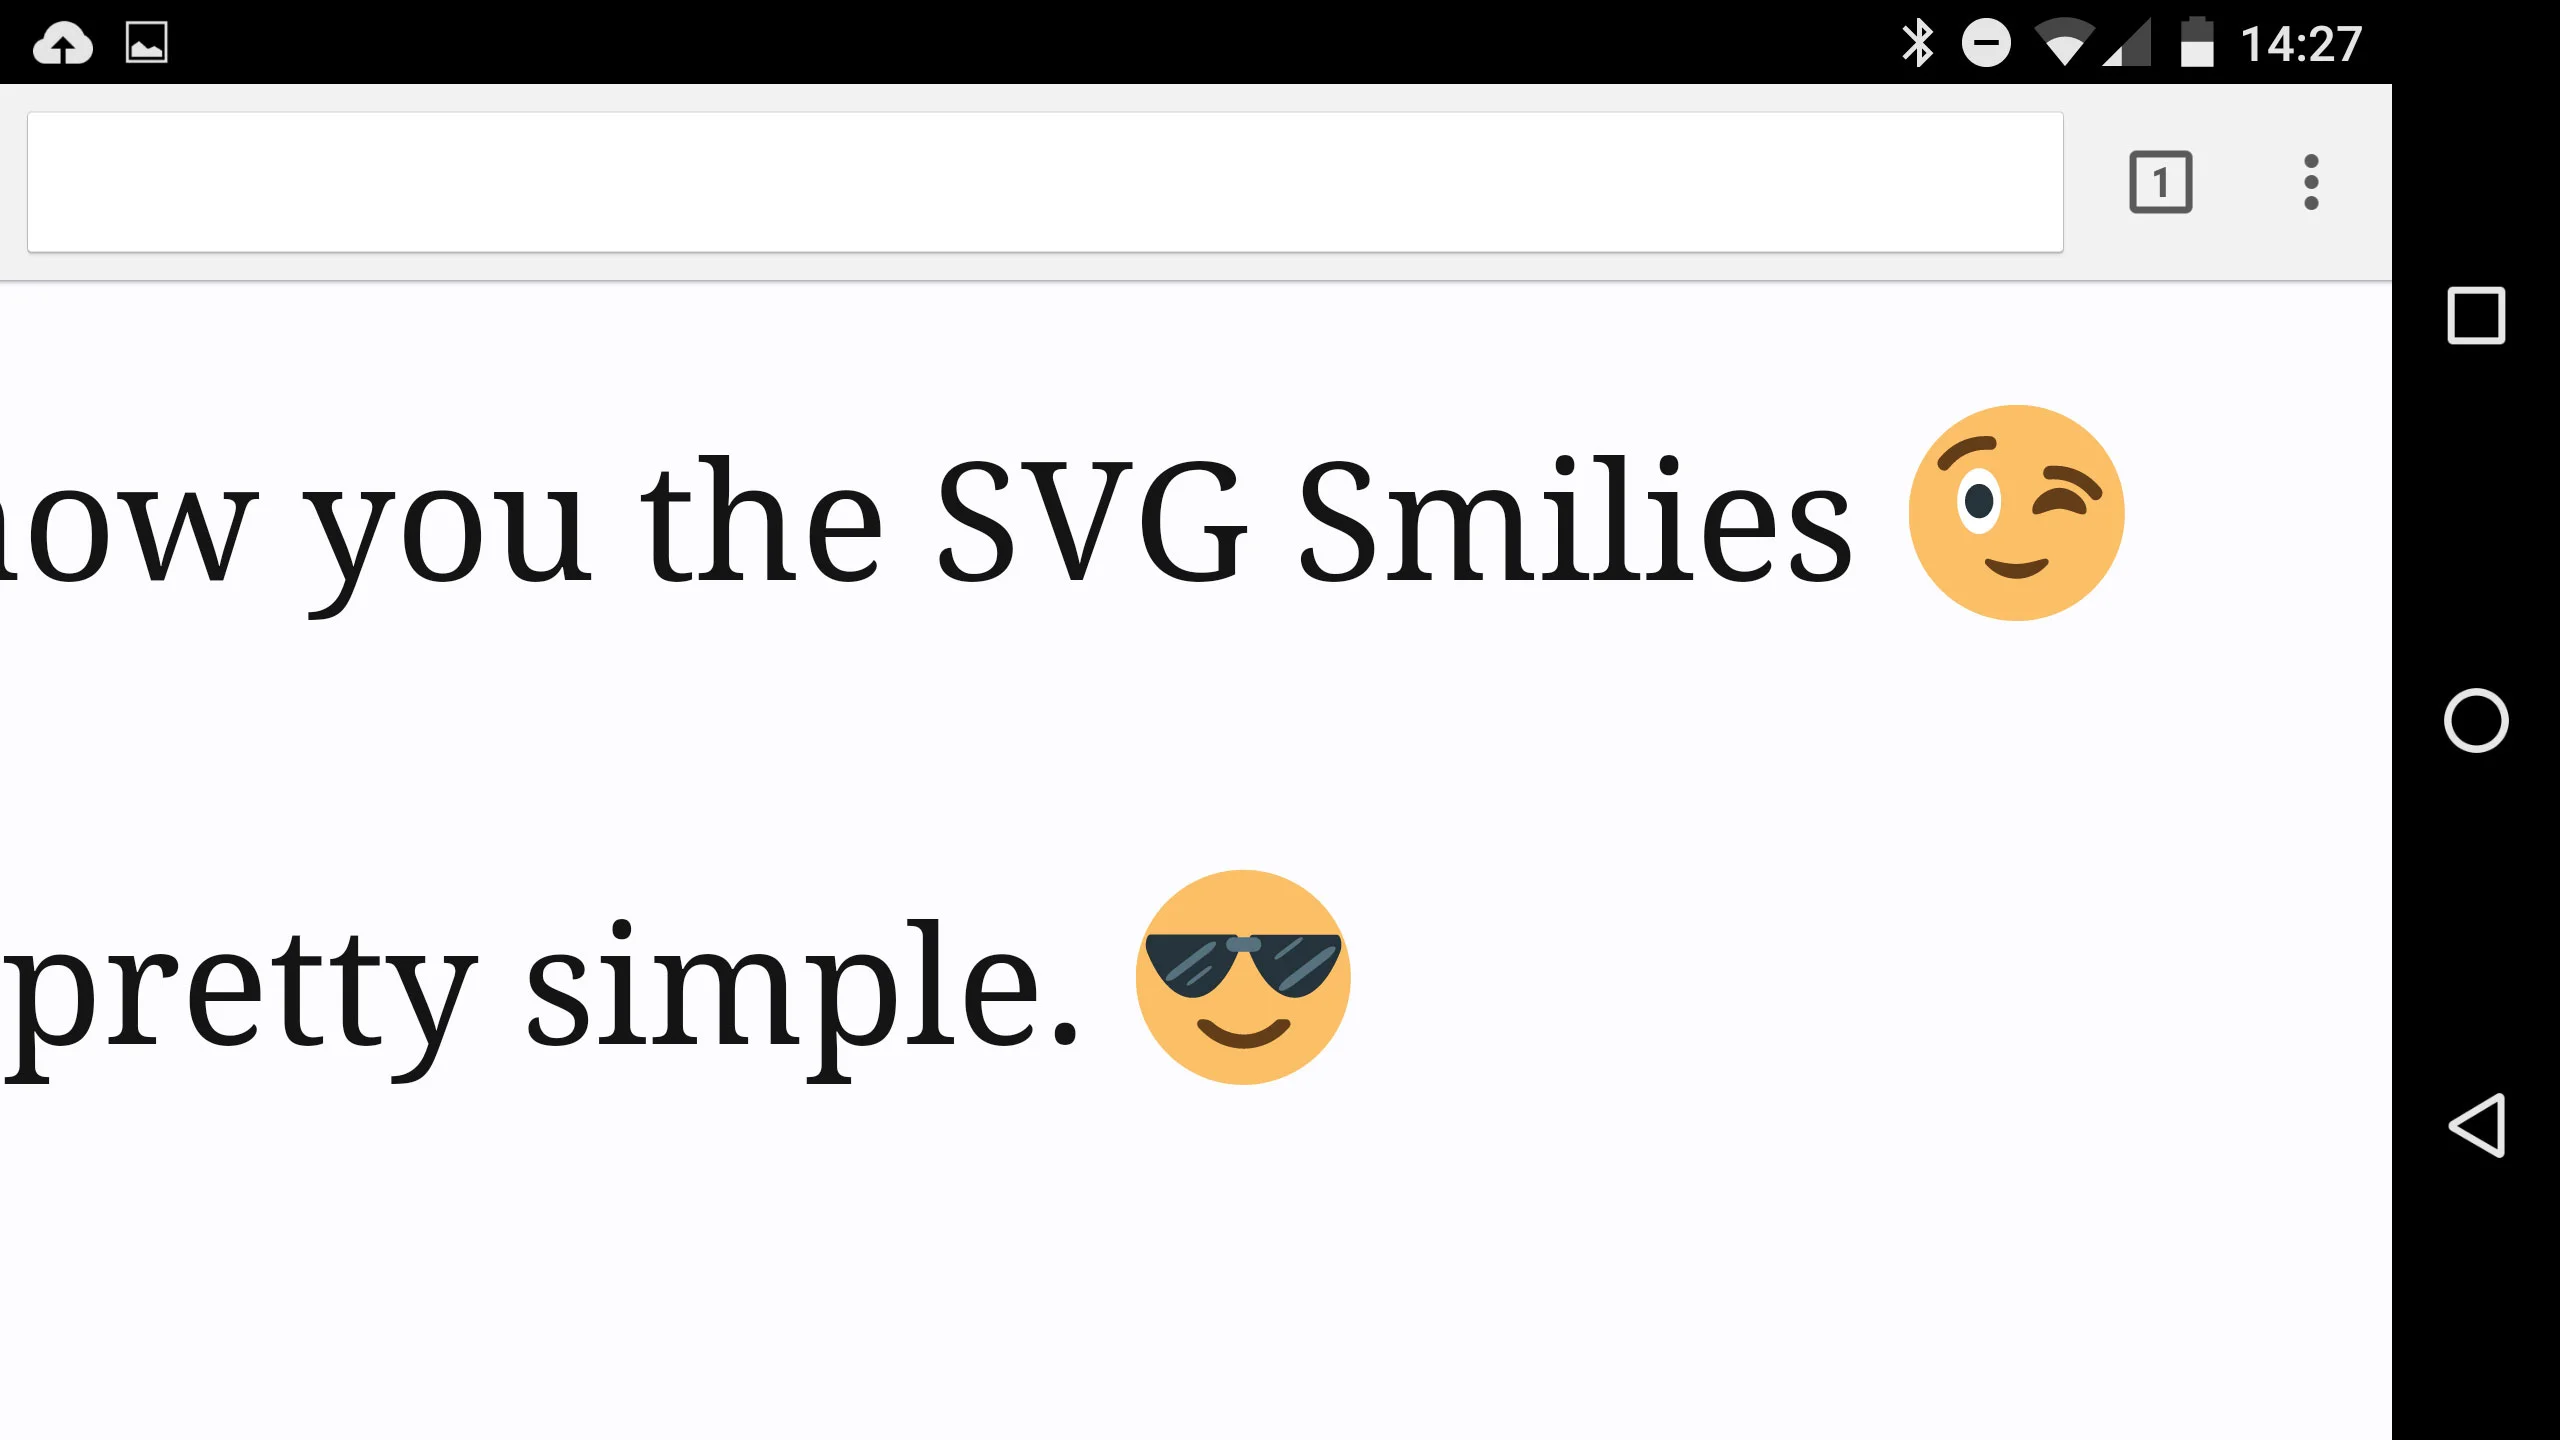 SVG Smilies on a high-res screen